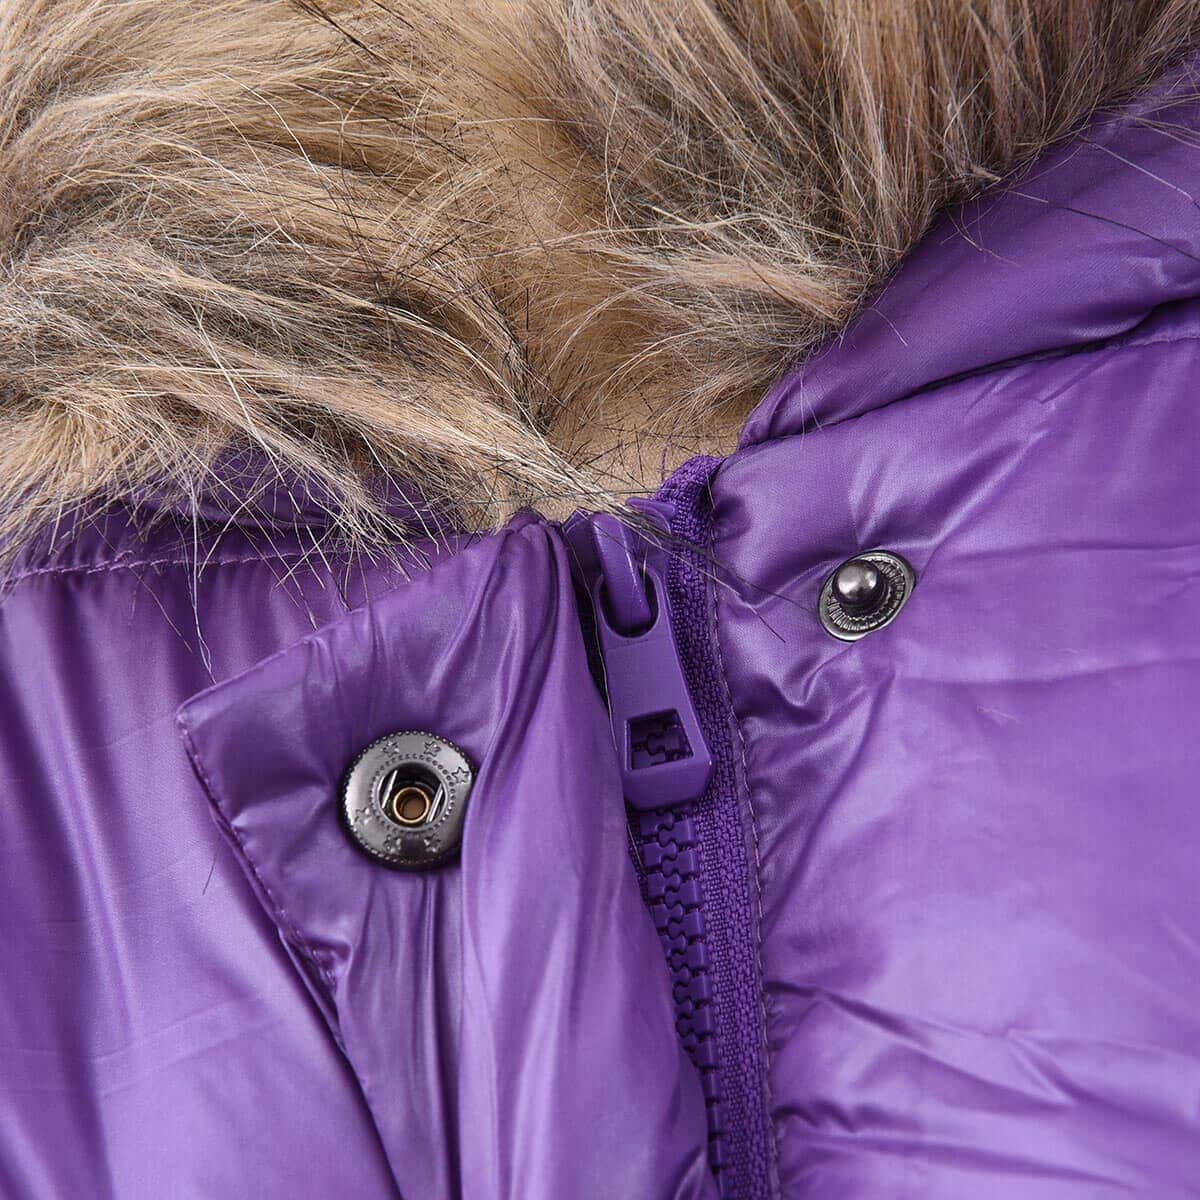 Purple Women's Puffer Jacket with Faux Fur Hood and Pockets - L (Nylon/Polyester) image number 4